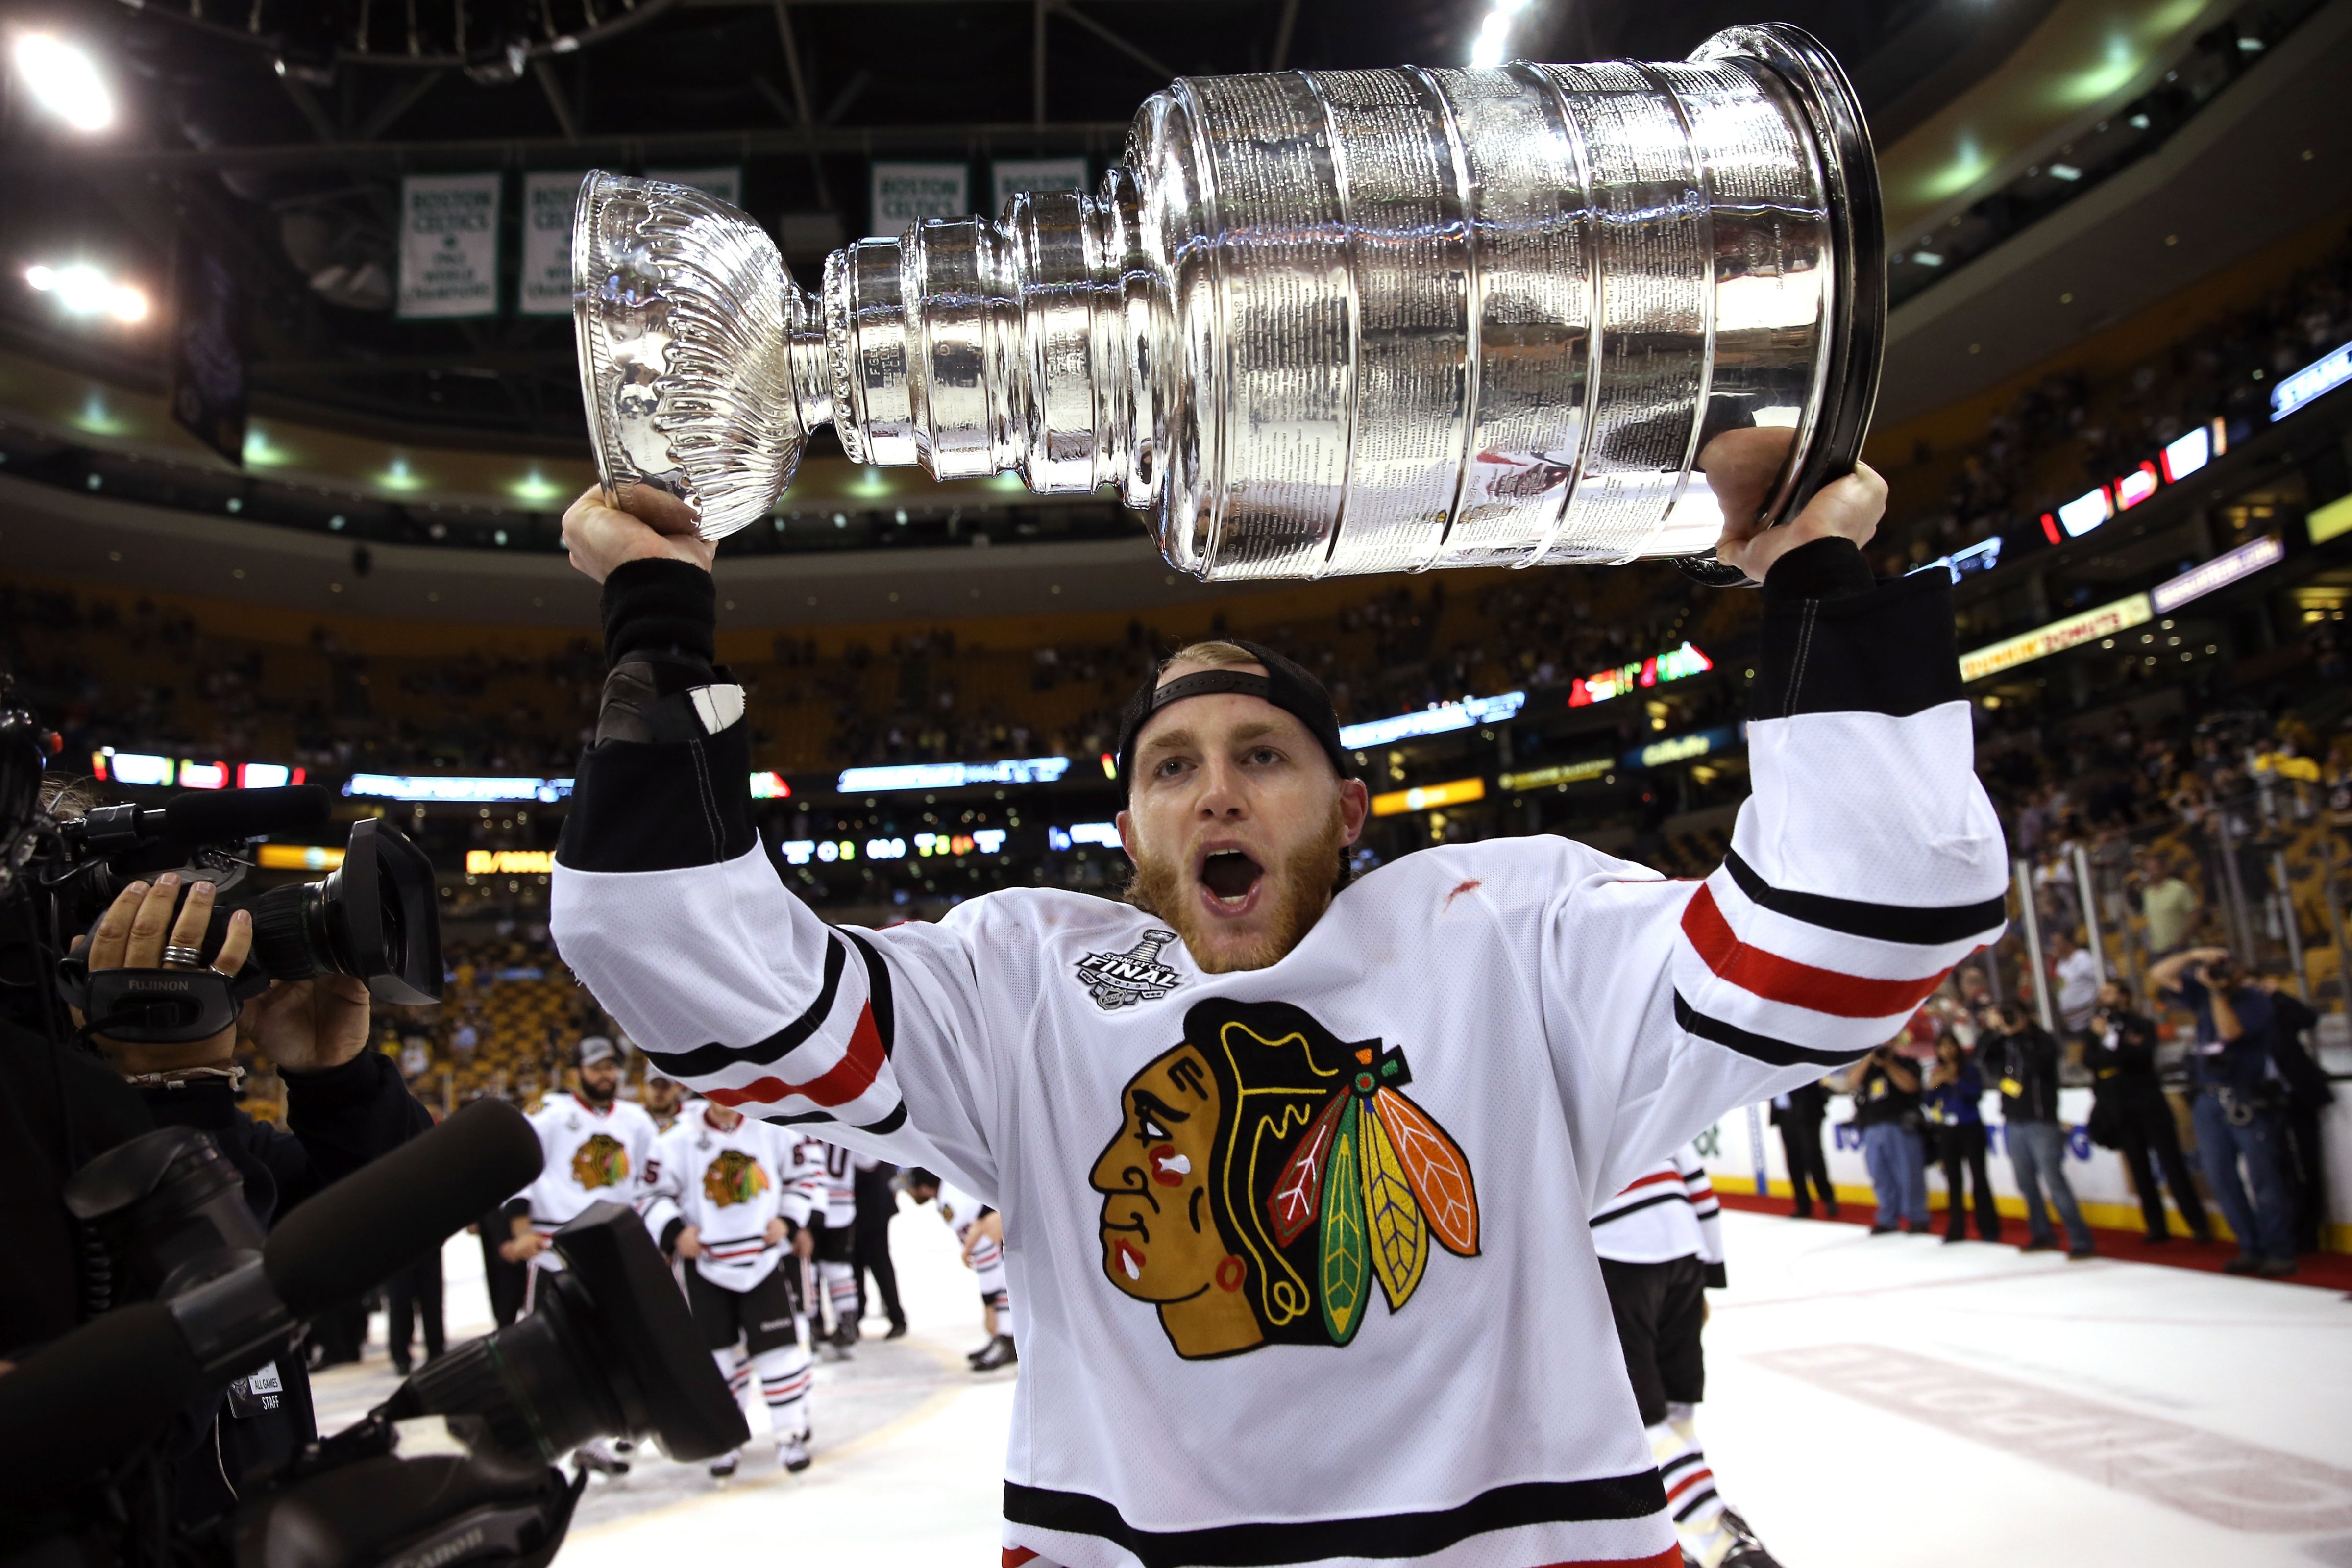 Patrick Kane #88 of the Chicago Blackhawks celebrates with the Stanley Cup after they won 3-2 against the Boston Bruins in Game Six of the 2013 NHL Stanley Cup Final at TD Garden on June 24, 2013 in Boston, Massachusetts. (Bruce Bennett&mdash;Getty Images)